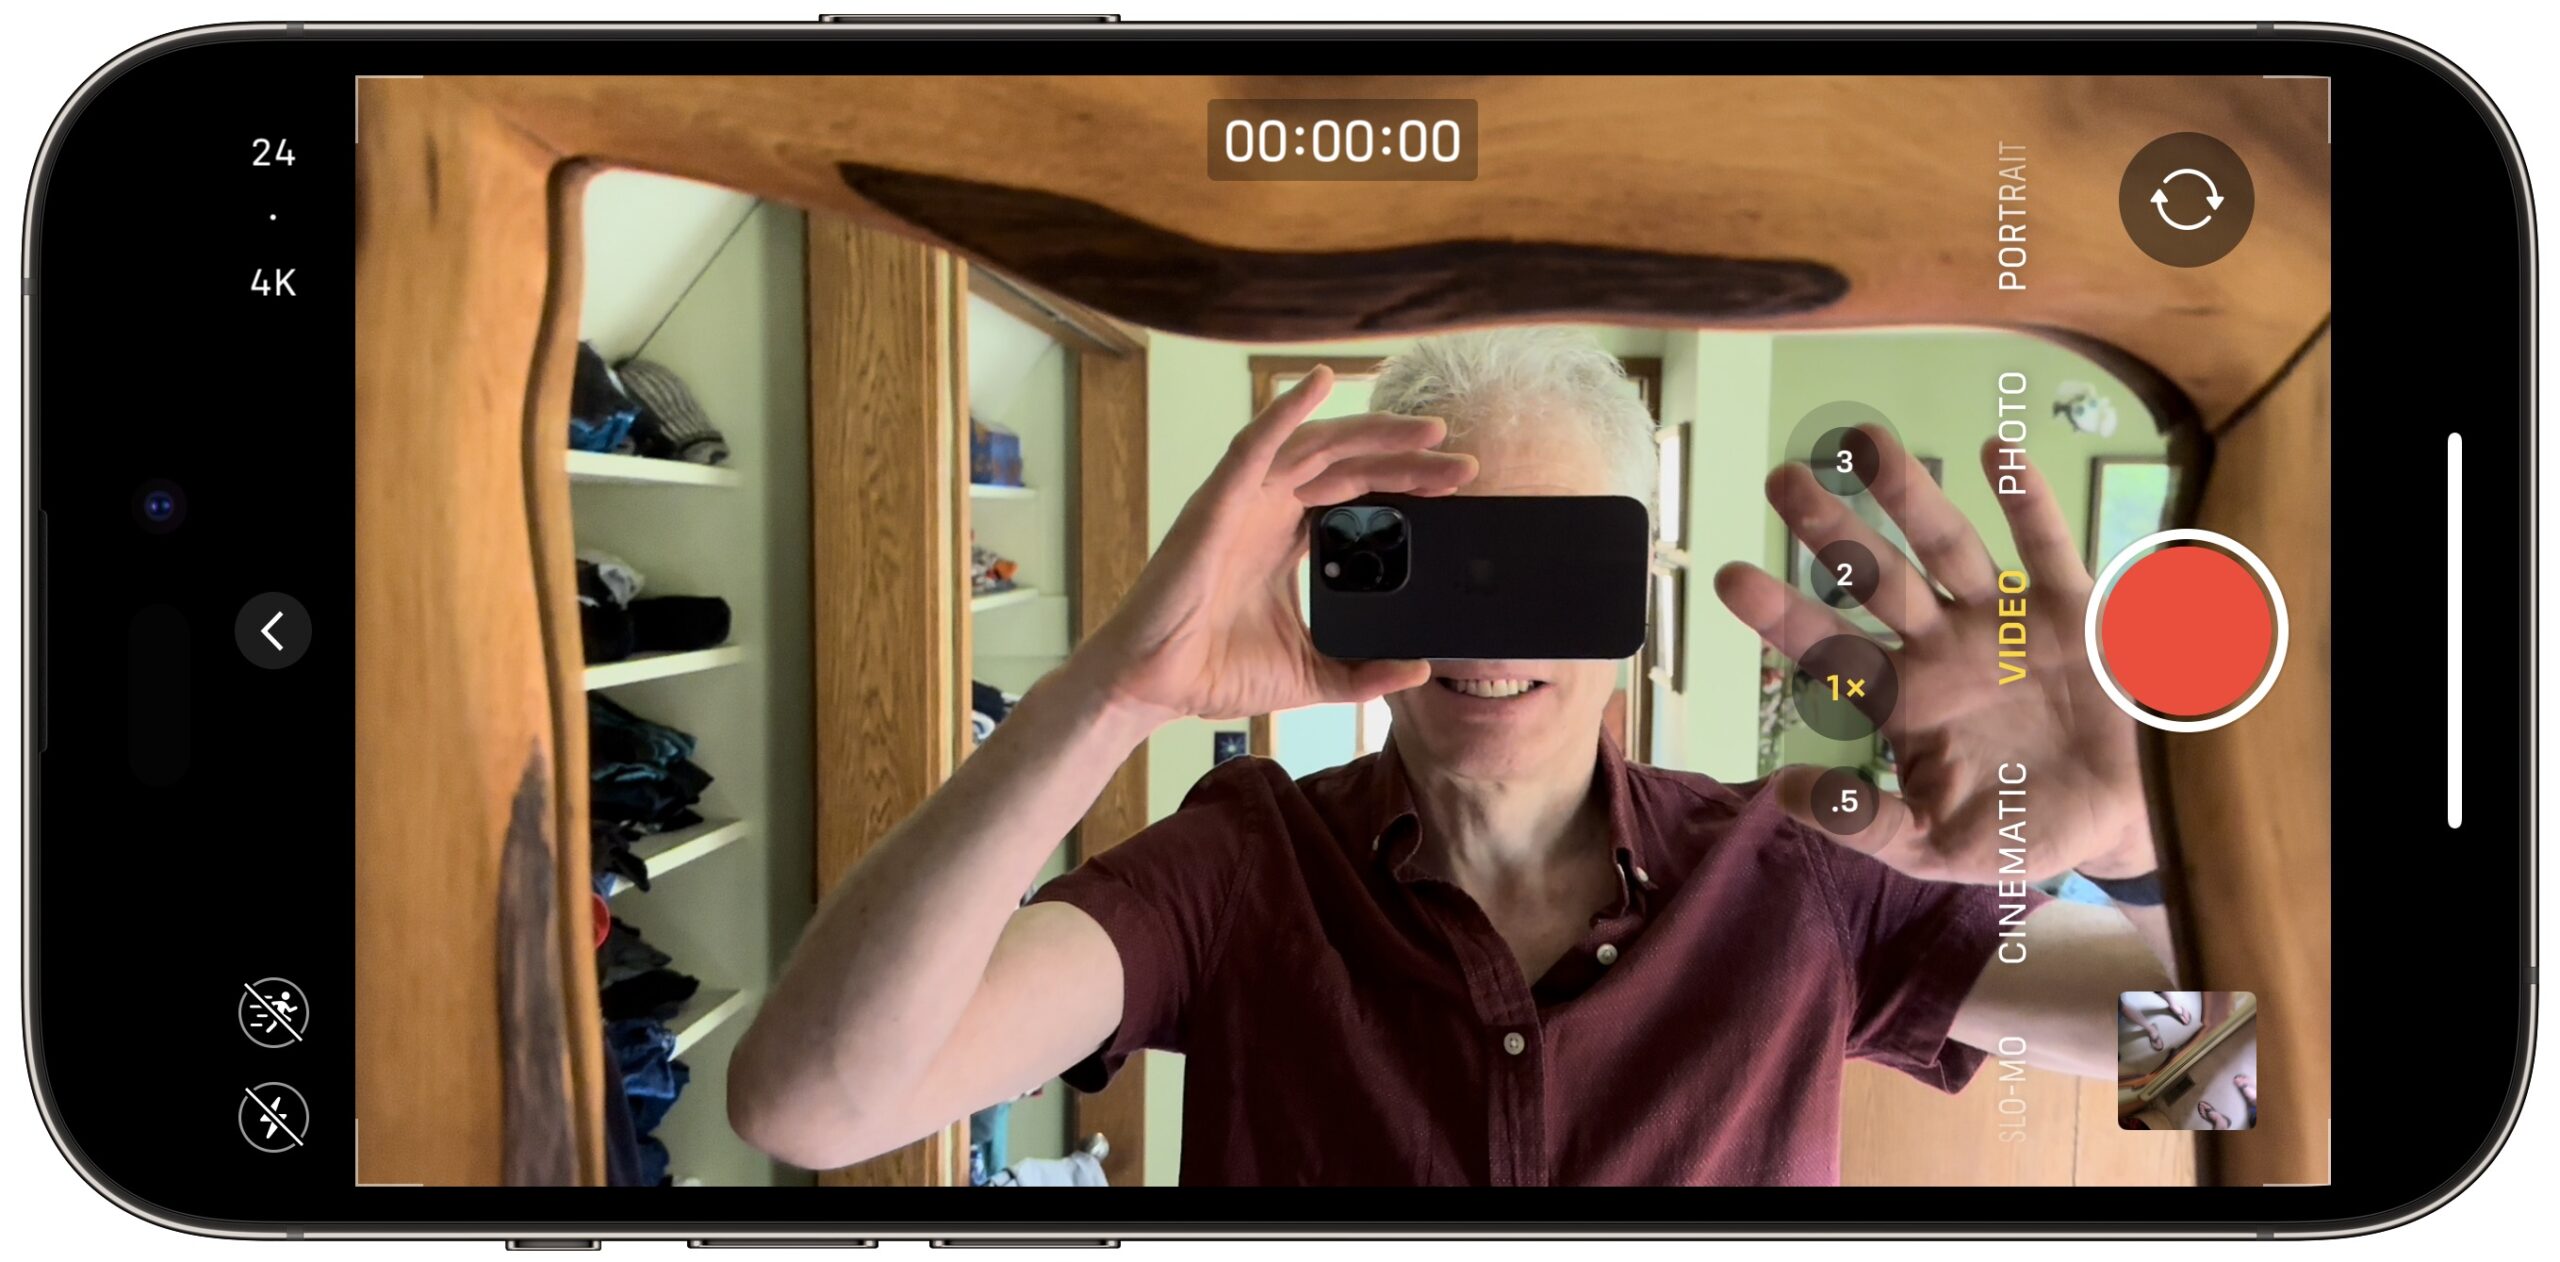 Demoing the iPhone vision enhancement approach